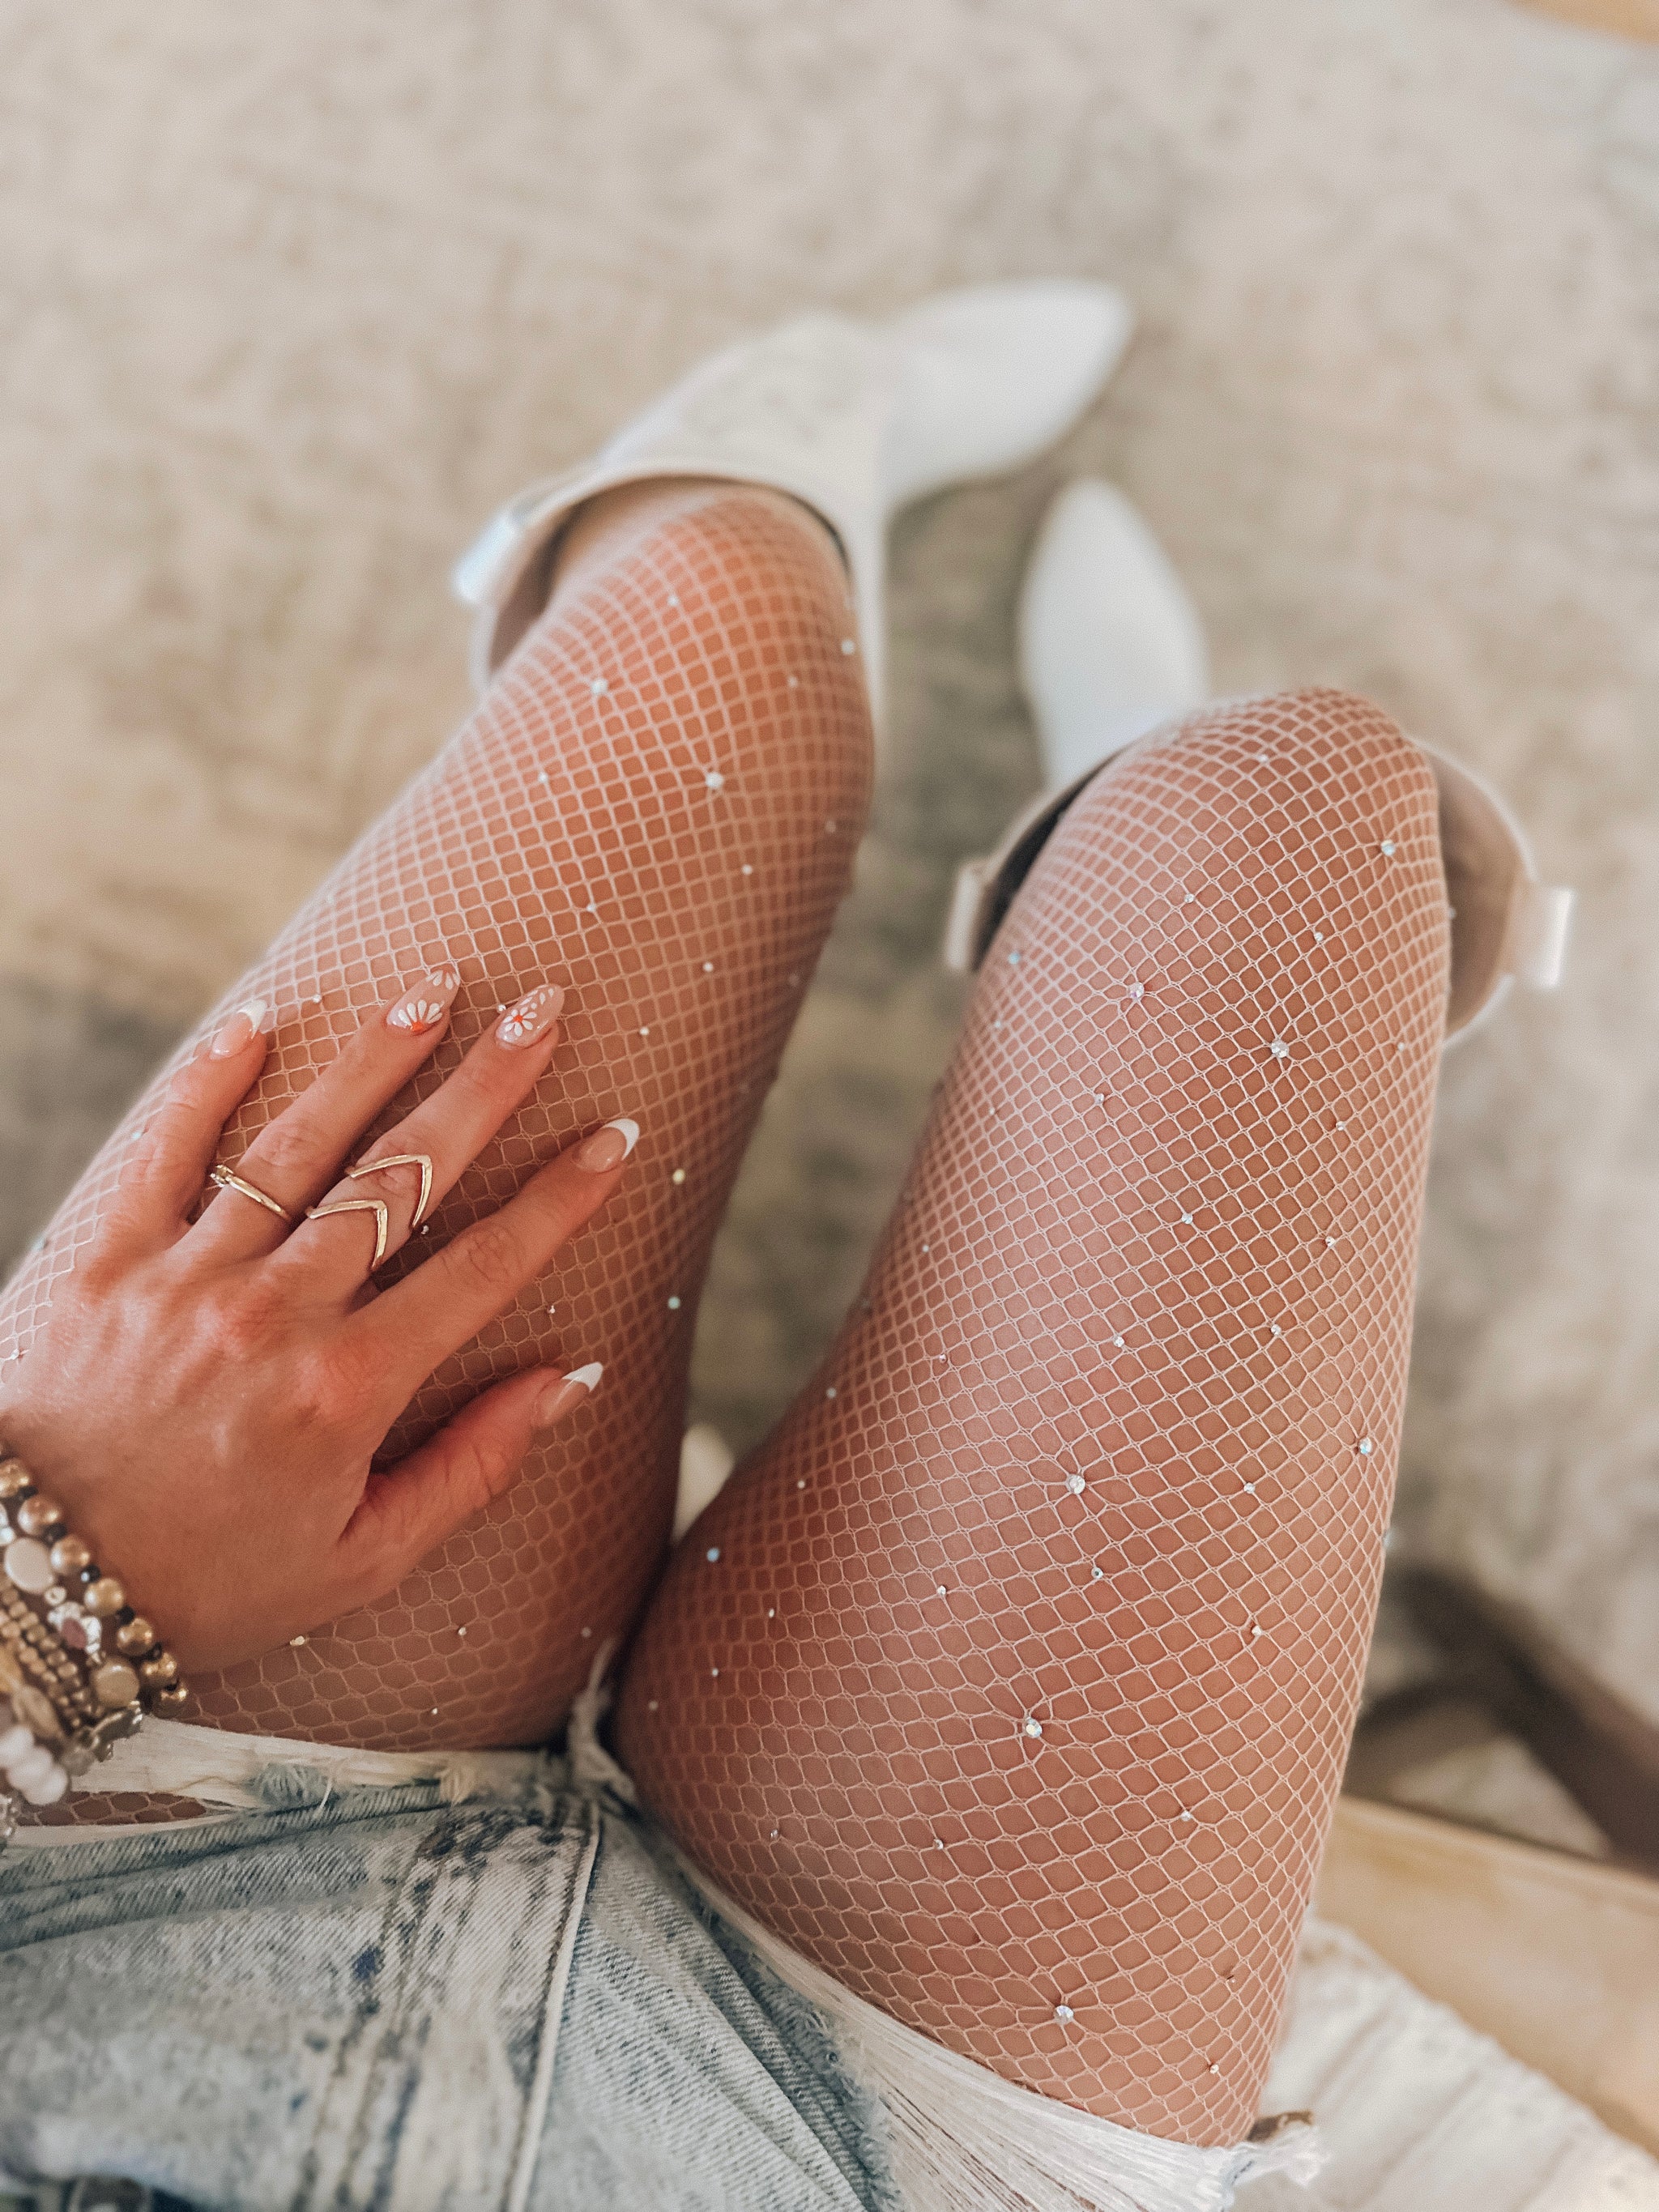 Sparkly fishnet tights